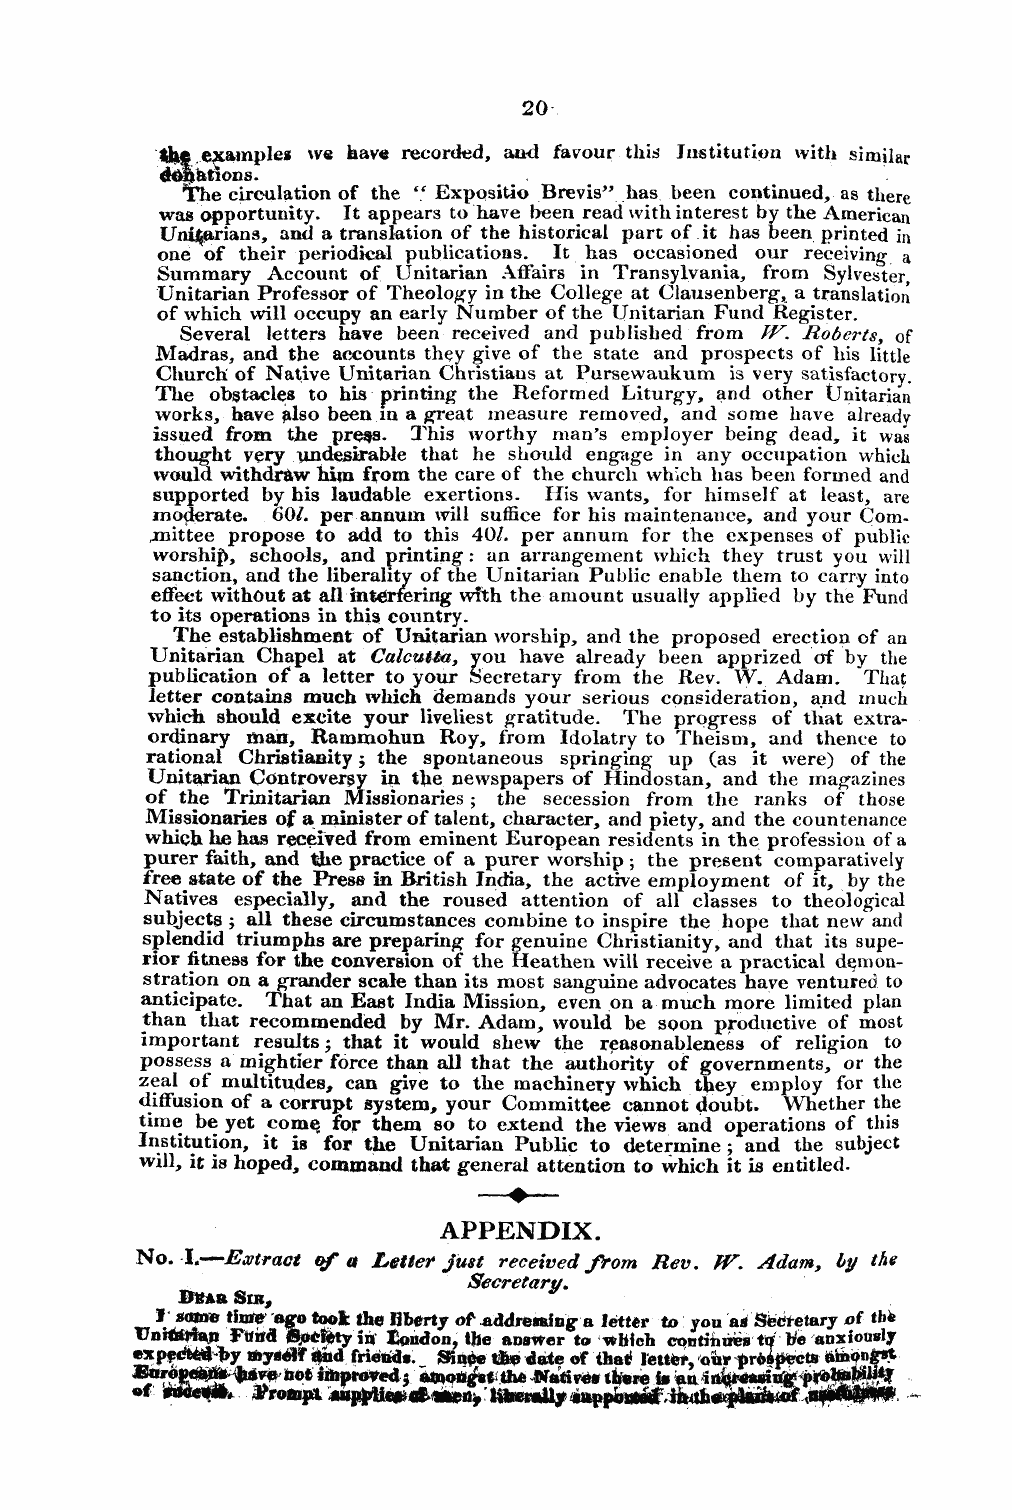 Monthly Repository (1806-1838) and Unitarian Chronicle (1832-1833): F Y, 1st edition, Supplement - Untitled Article